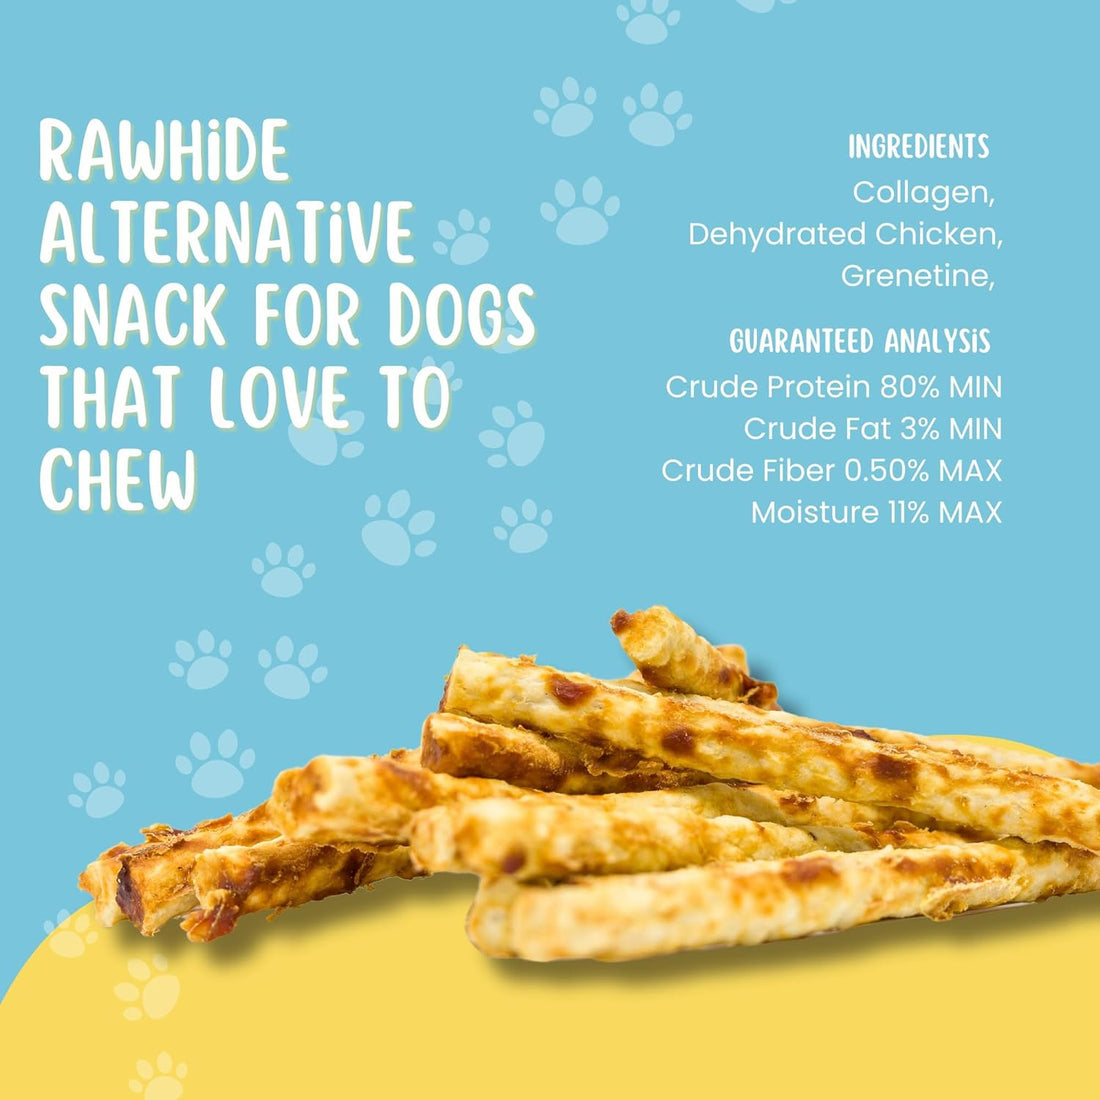 6" Rawhide Alternative Chicken or Beef Flavored Sticks for Small & Medium Dogs